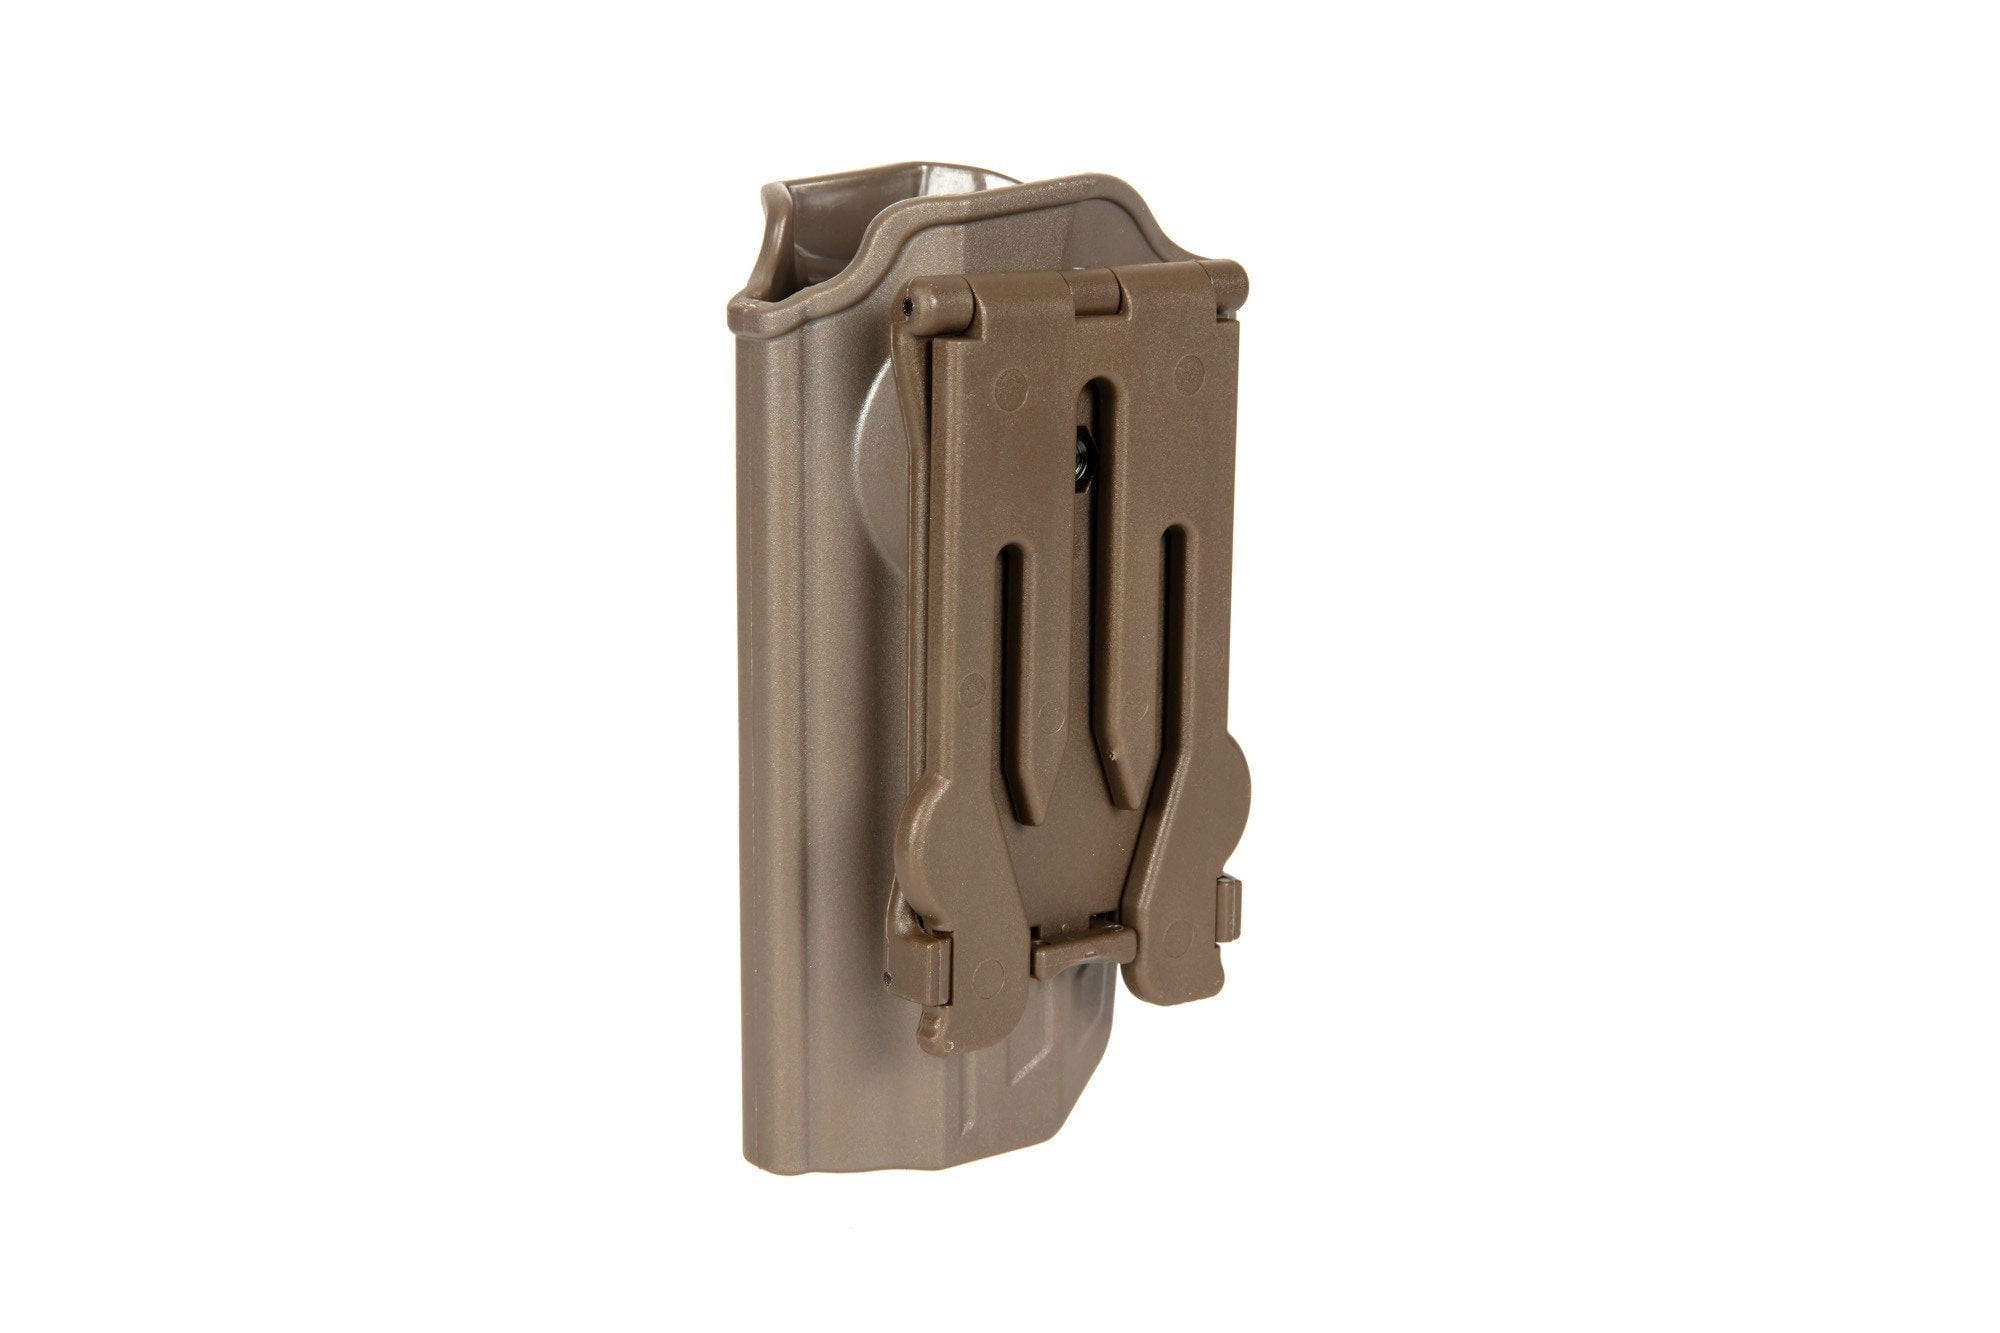 DEFENDER R-Holster for Beretta 92 pistols (MOLLE) - FDE by CYTAC on Airsoft Mania Europe